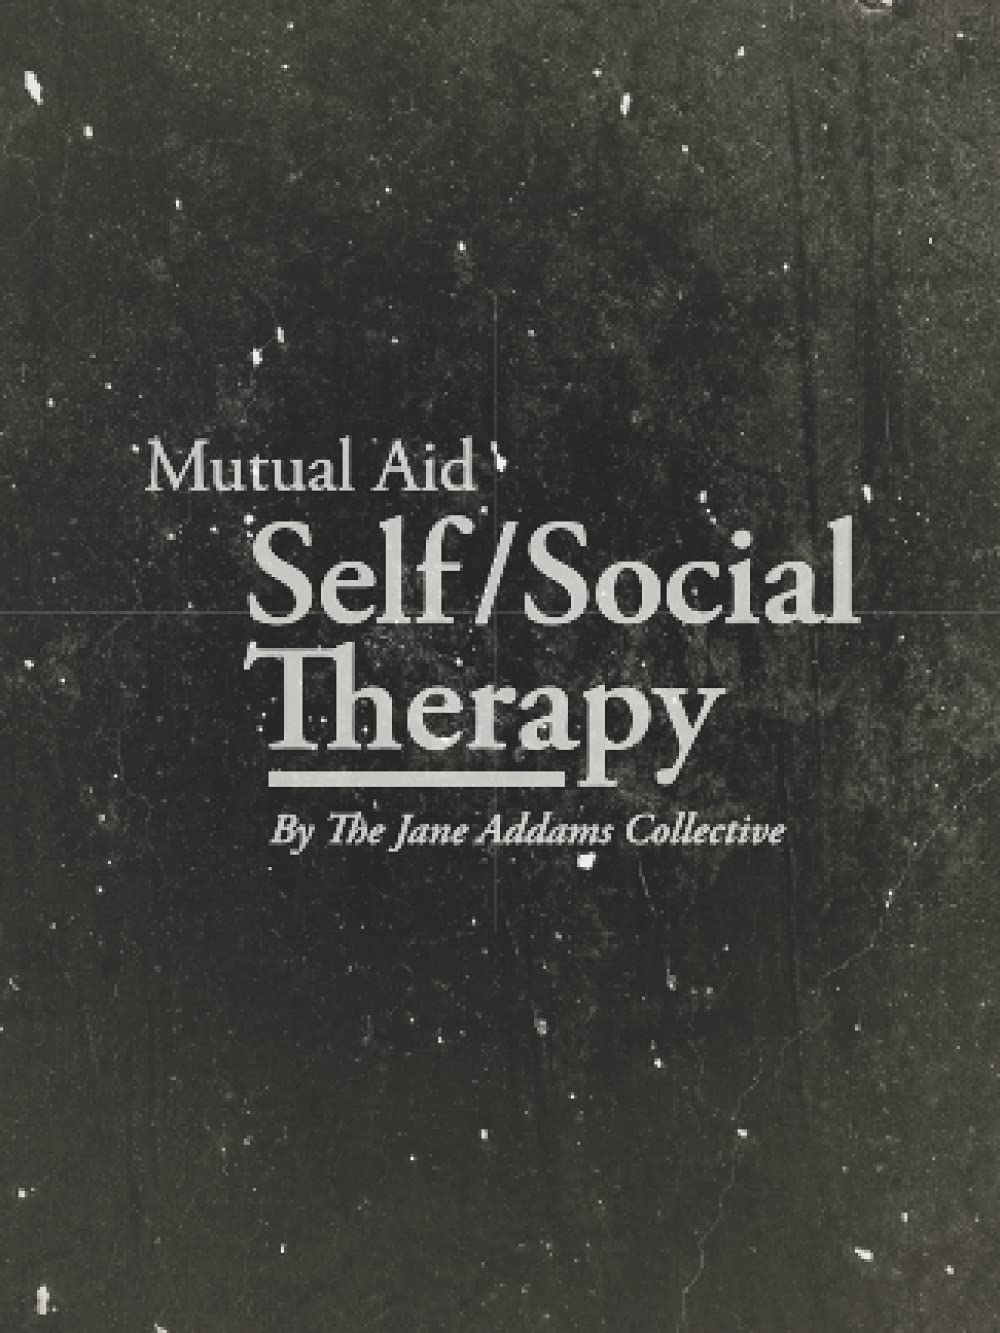 Mutual Aid Self/Social Therapy (Paperback)